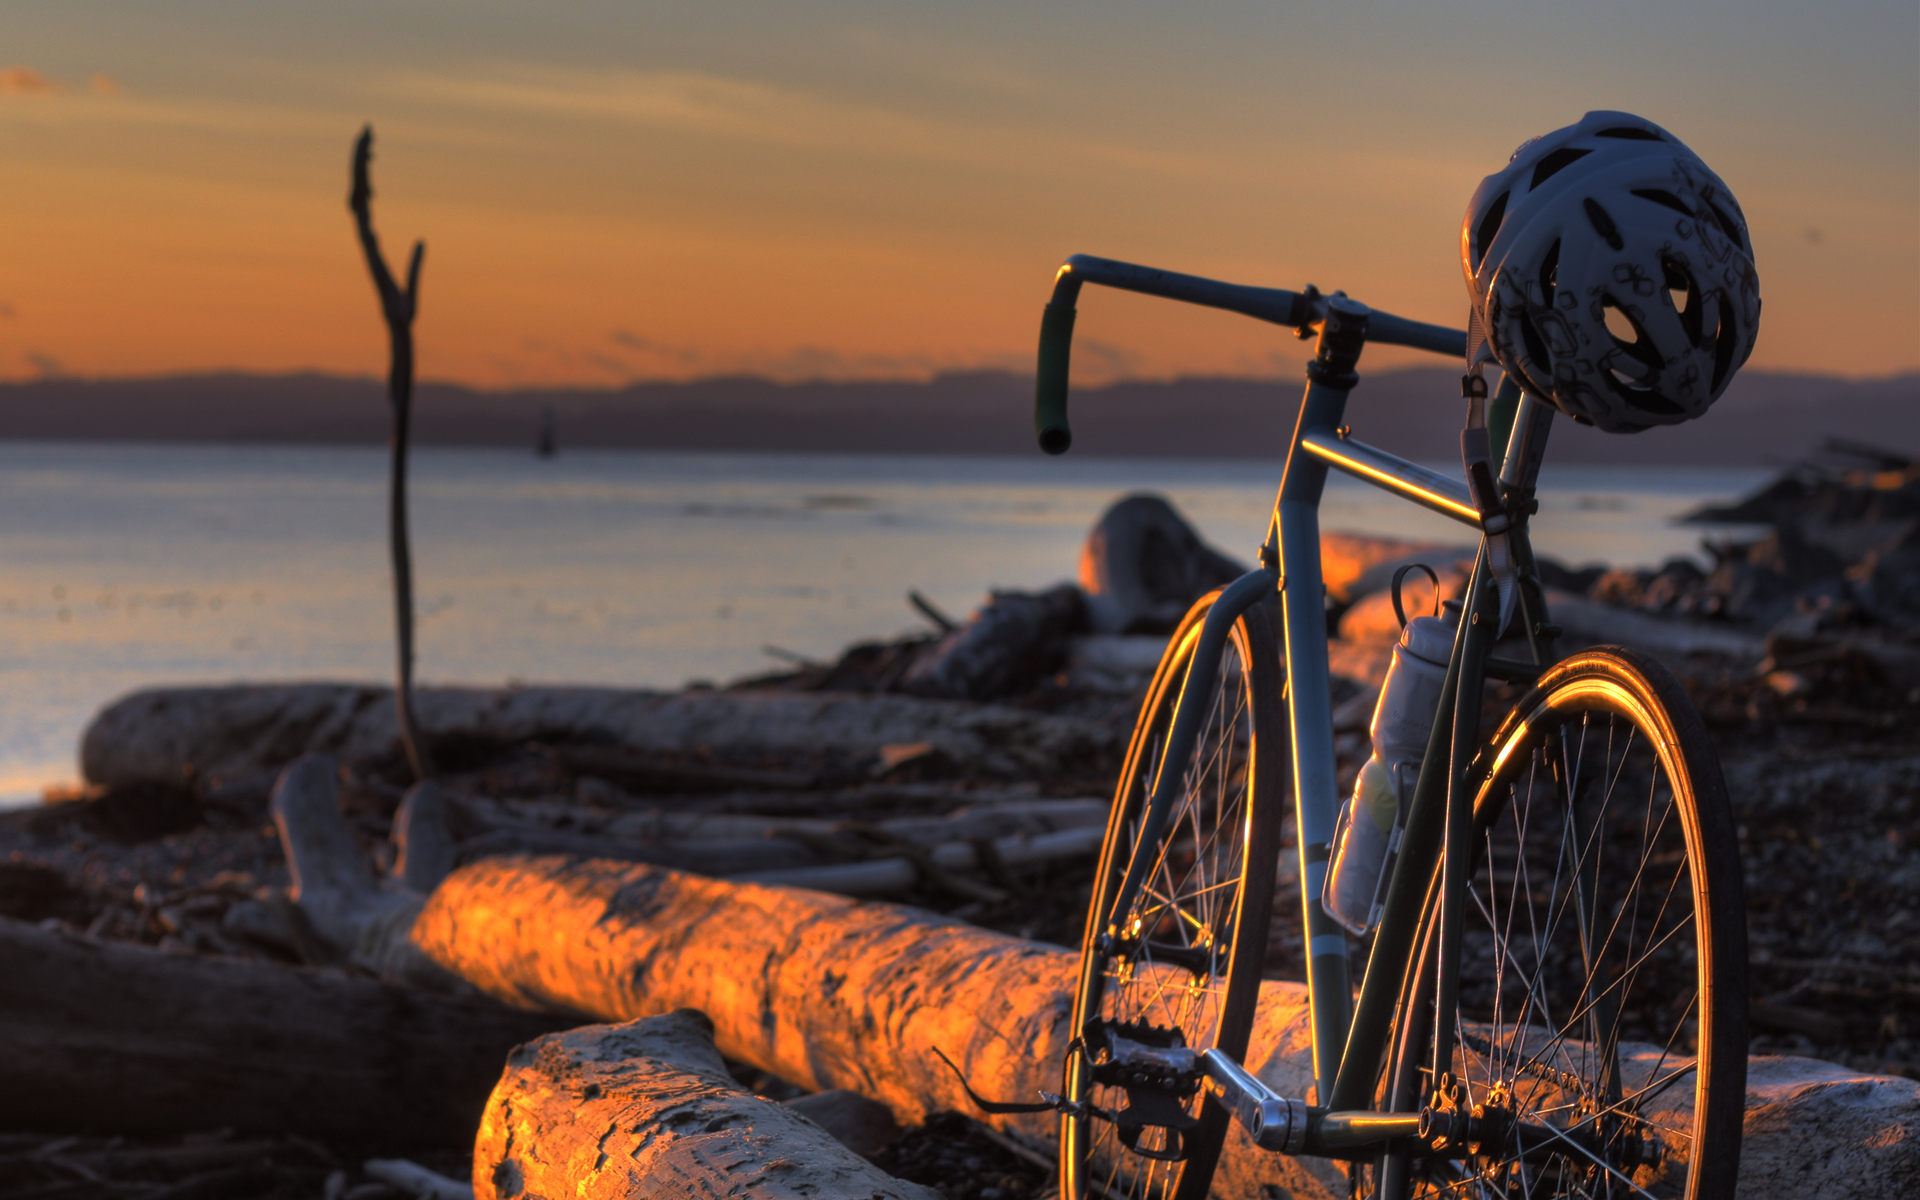 vehicles, Bicycle, Bike, Wheels, Frame, Mech, Spokes, Helmet, Hat, Sports, Landscapes, Beaches, Driftwood, Wood, Lakes, Water, Sunset, Sunrise, Sky, Clouds Wallpaper